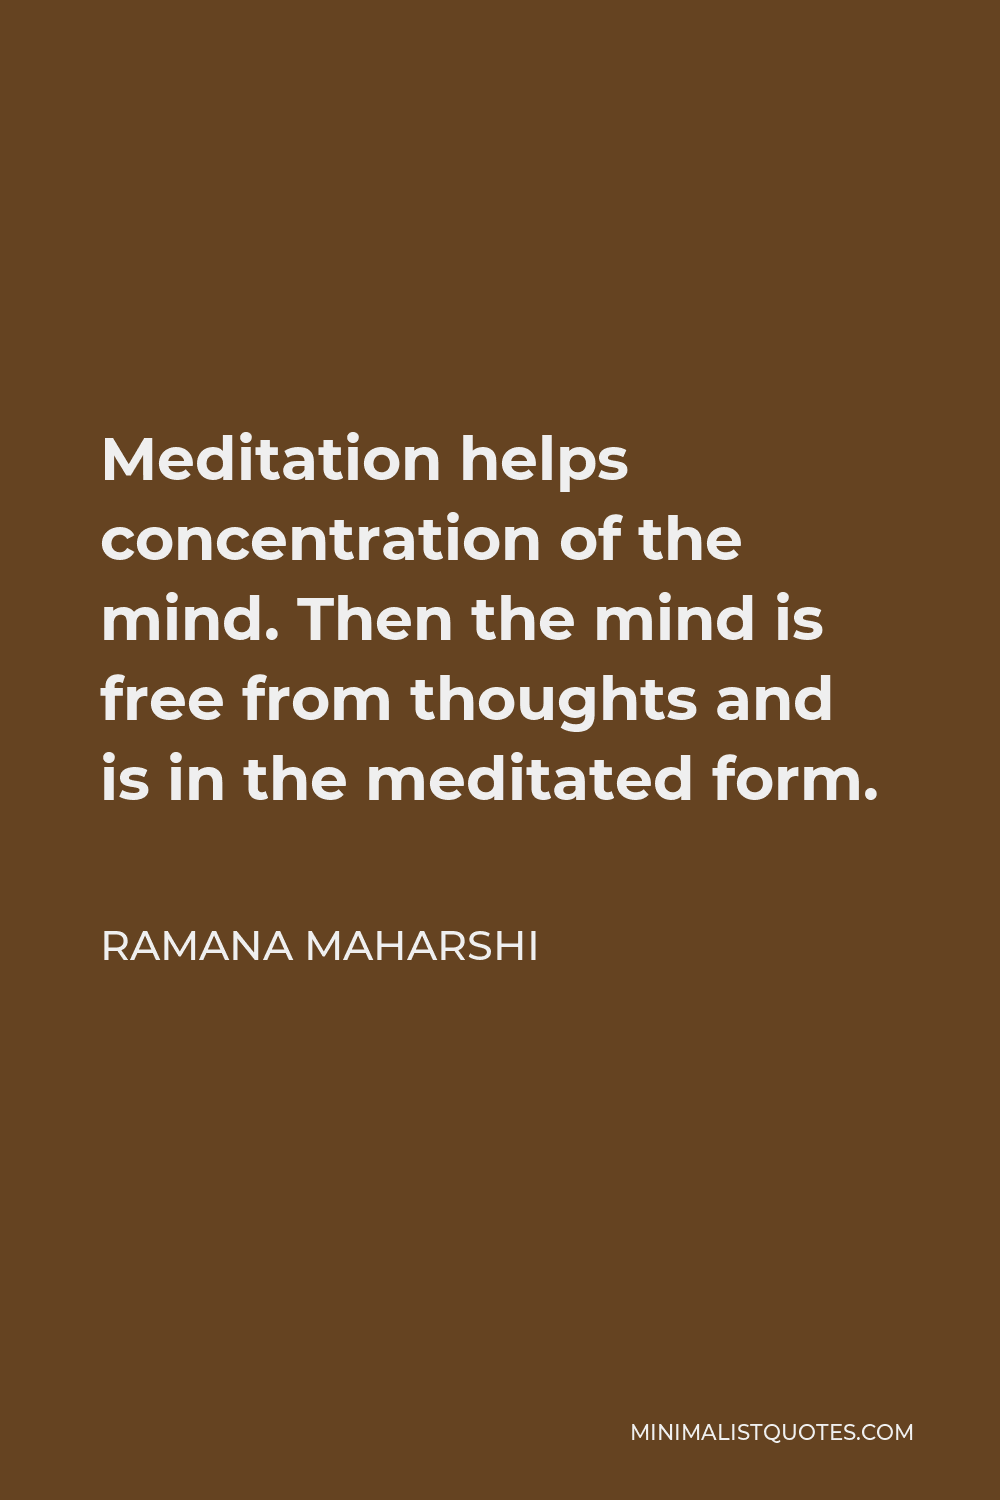 Ramana Maharshi Quote - Meditation helps concentration of the mind. Then the mind is free from thoughts and is in the meditated form.